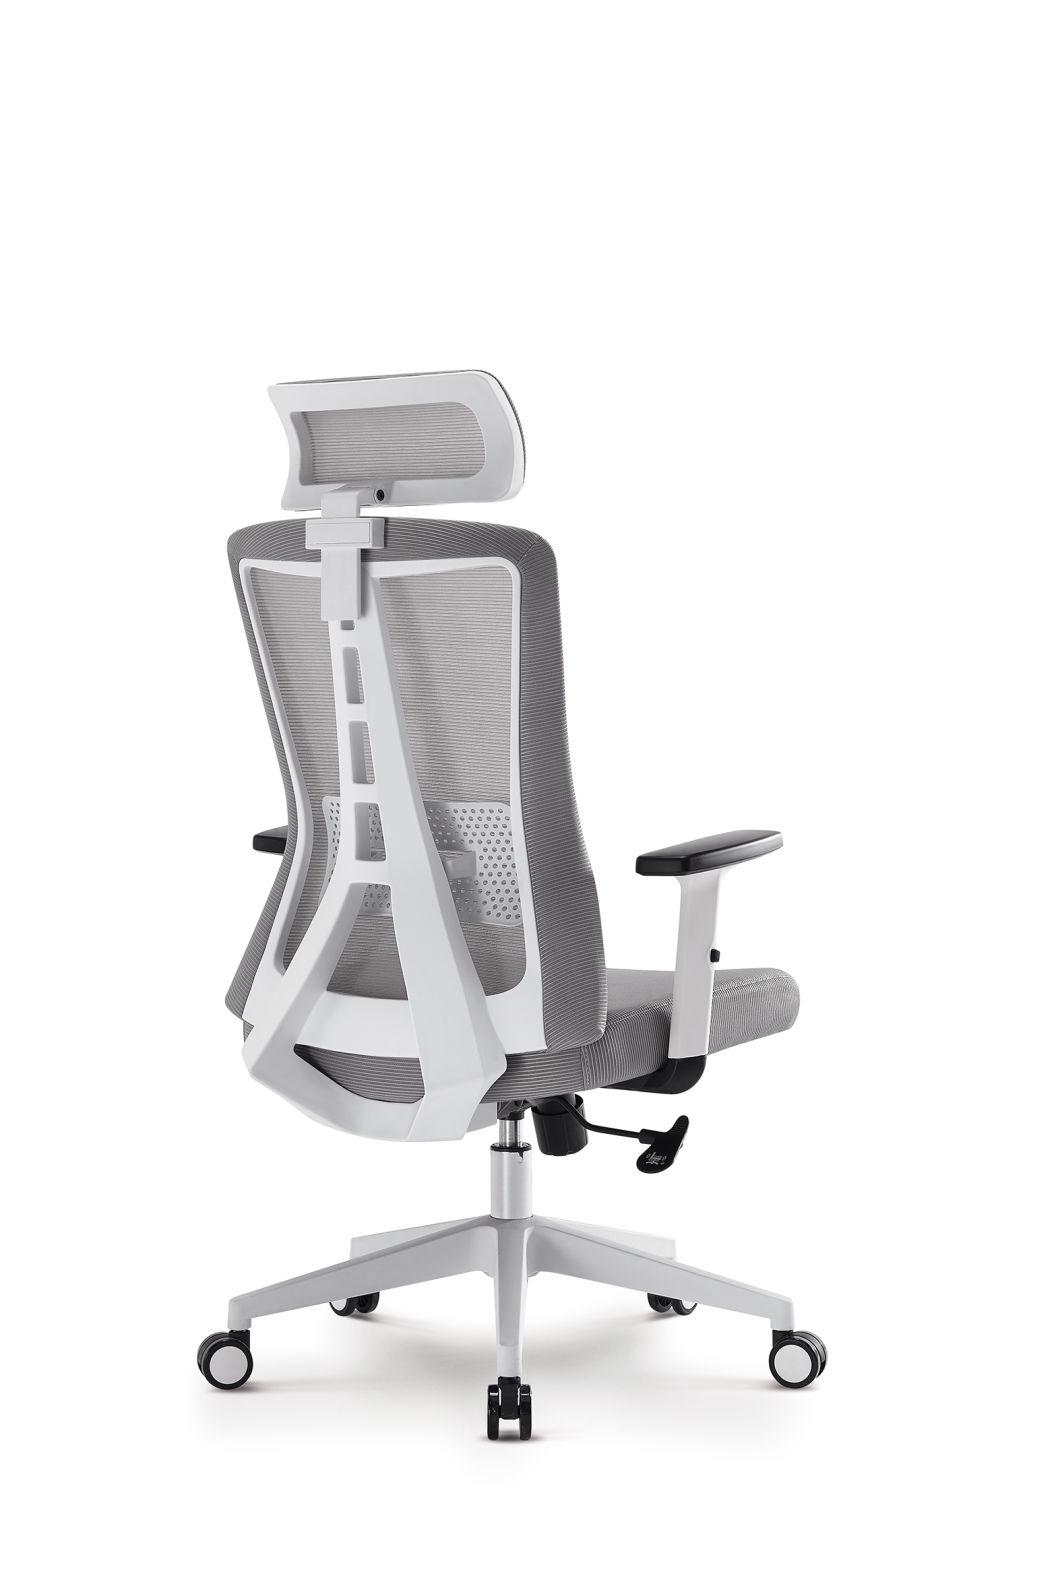 Swivel Executive Commercial Furniture Management High Back Adjustable Silla De Oficina Executive Office Chair